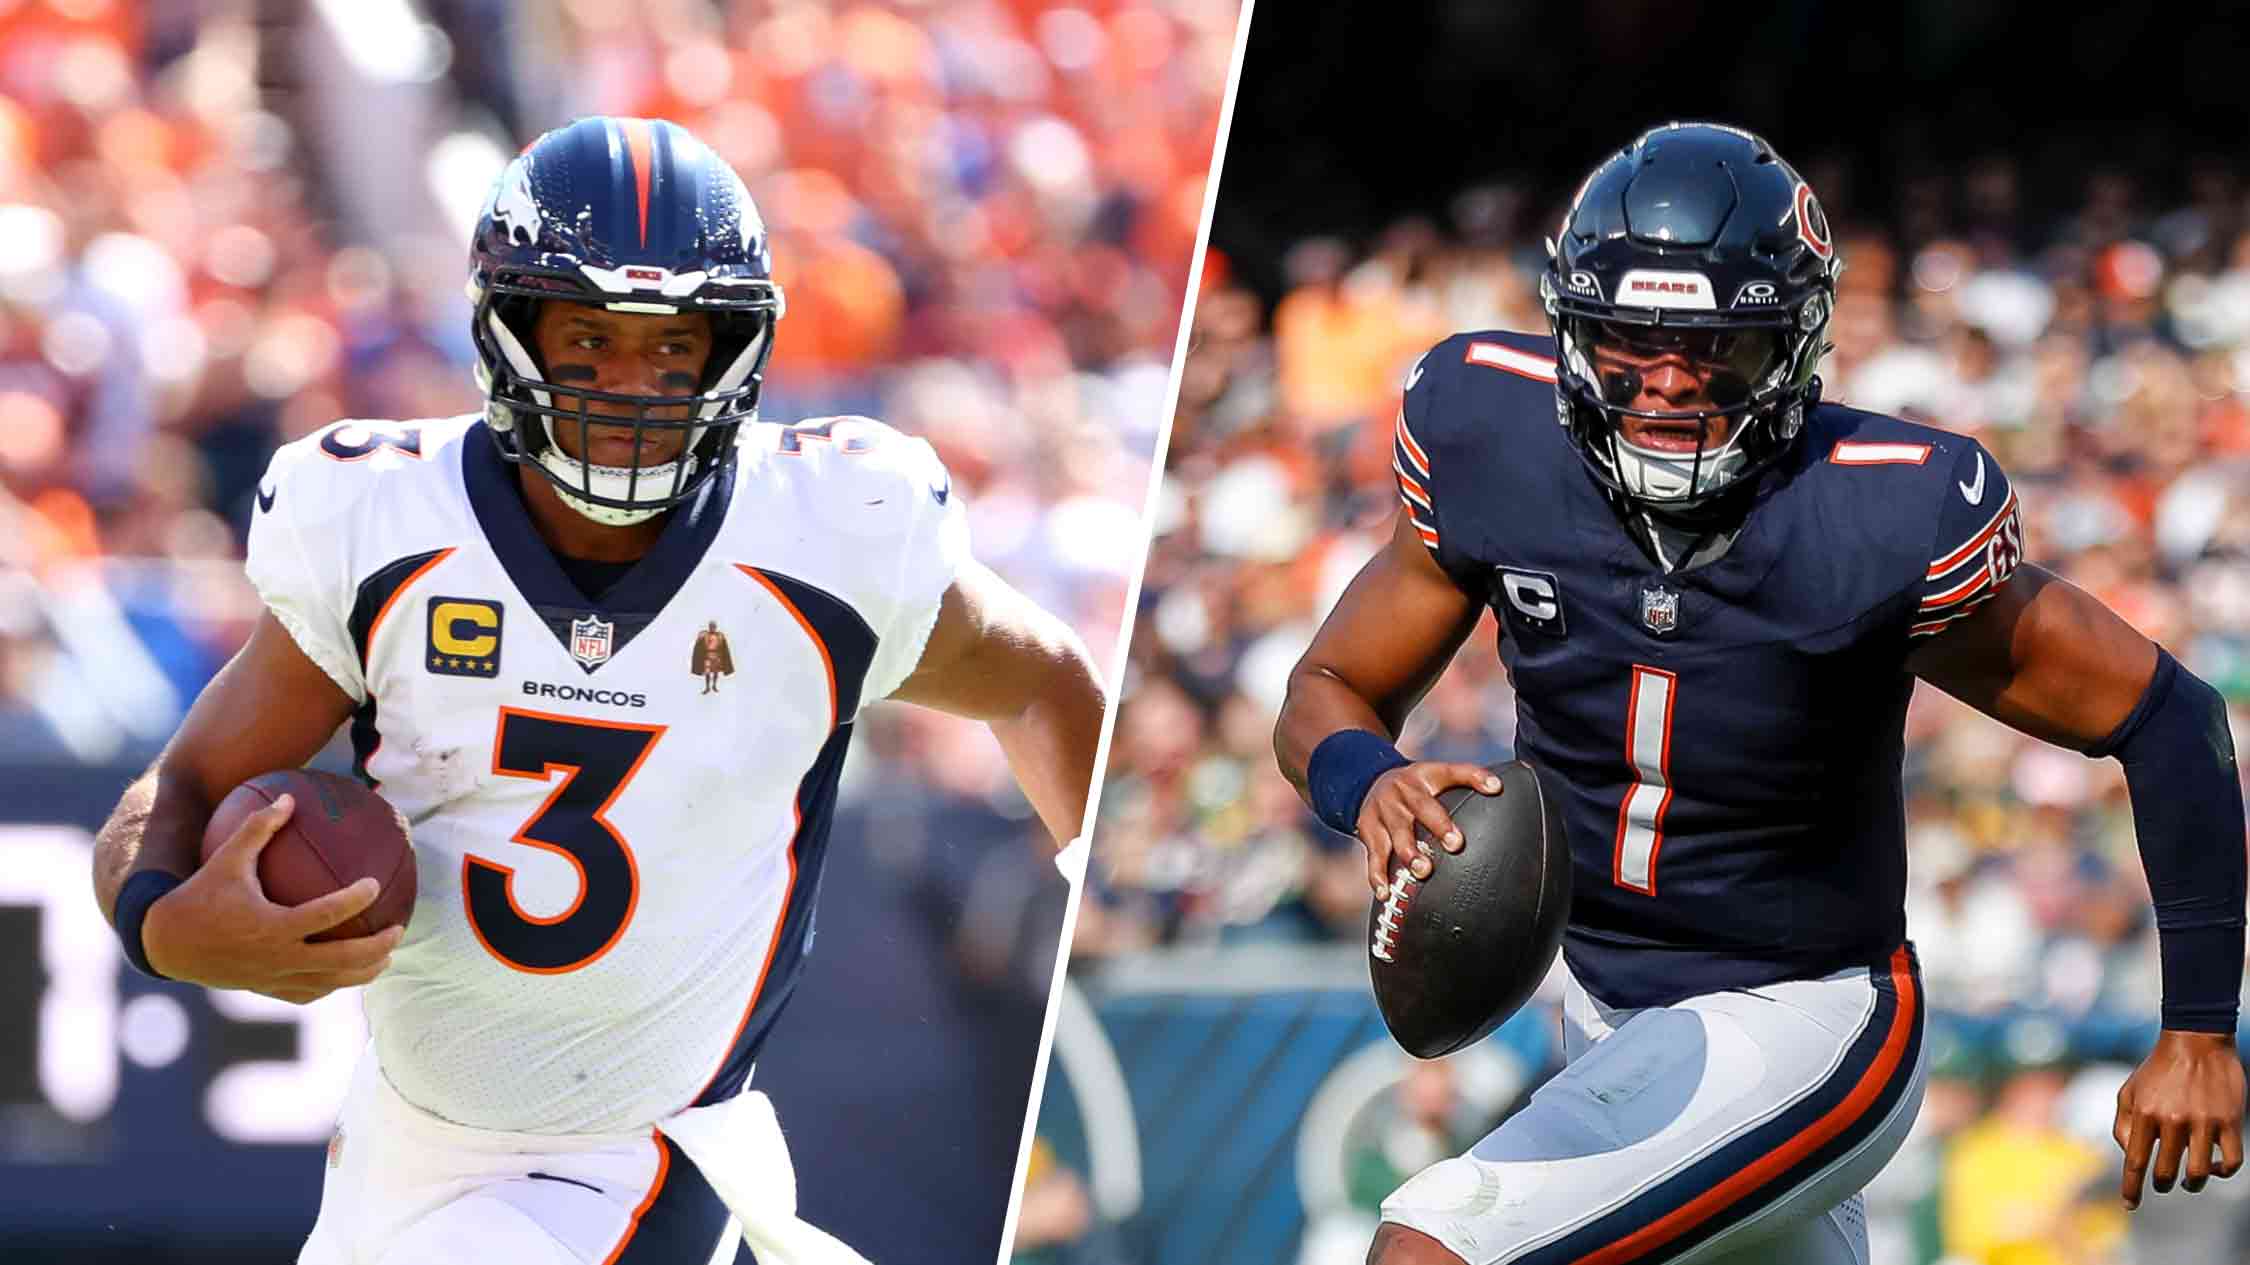 Bears vs. Broncos live stream: How to watch NFL Week 4 game on TV